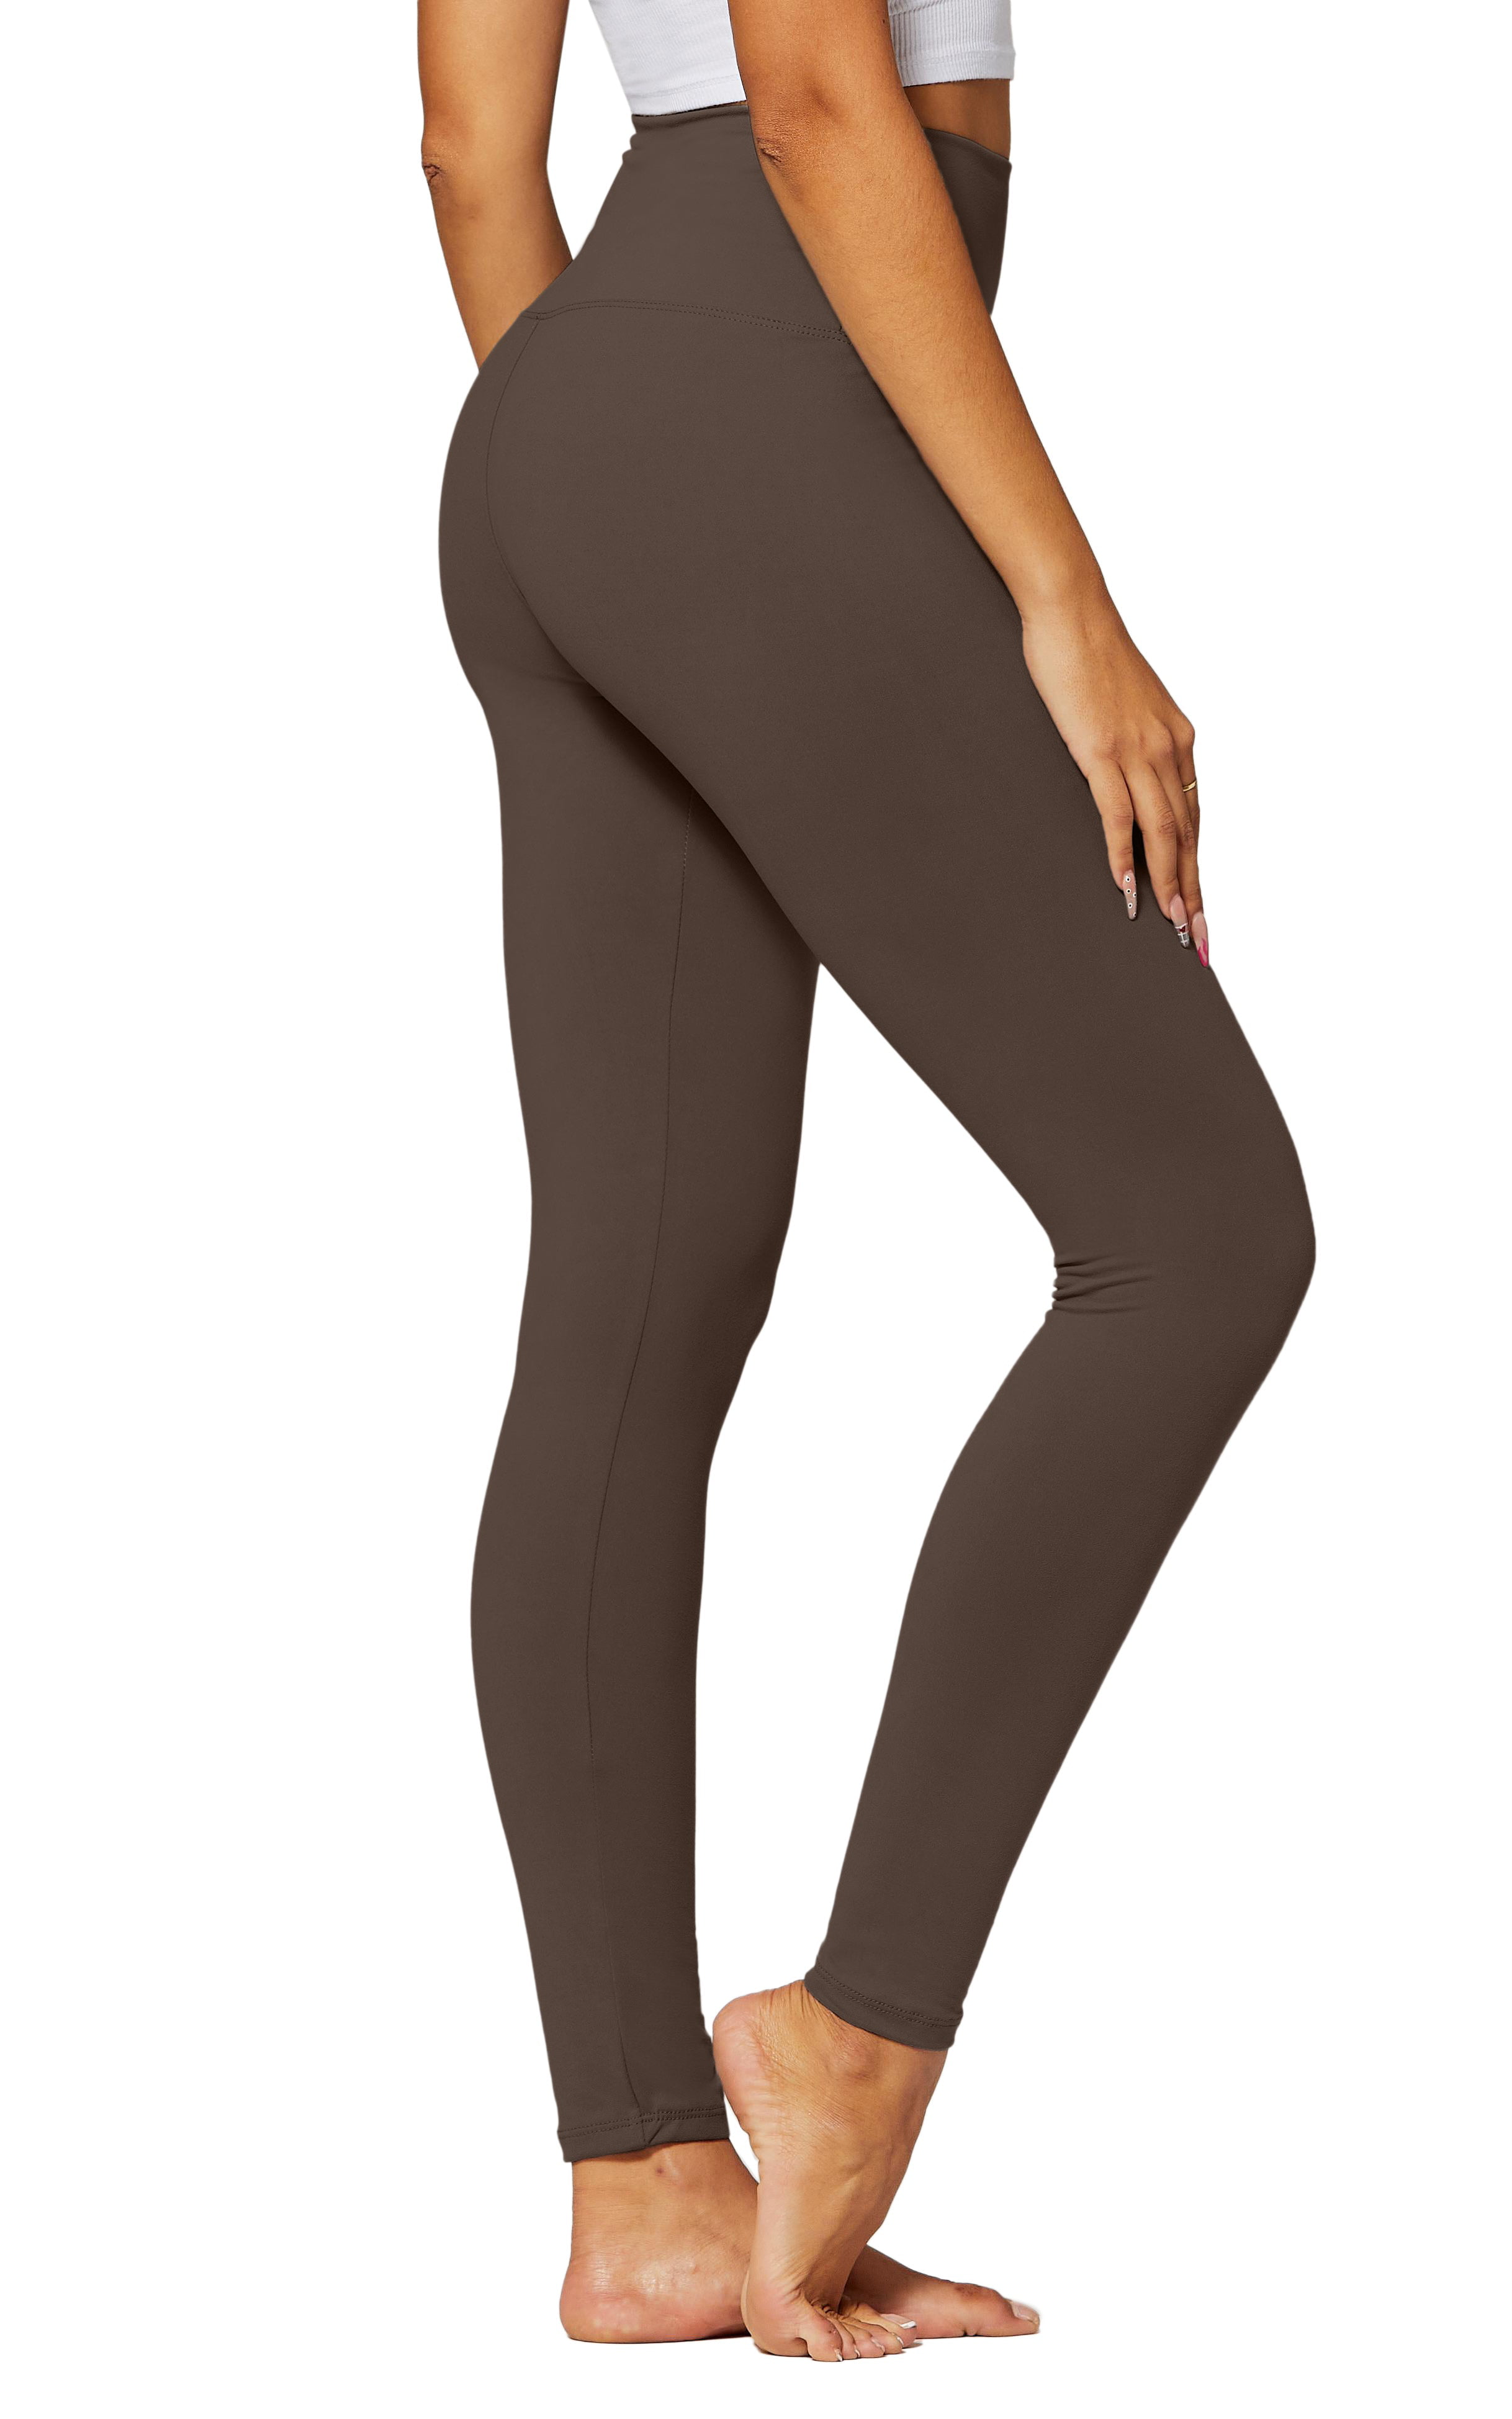 Conceited Women's Ivy Buttery Soft High Waist Basic Leggings